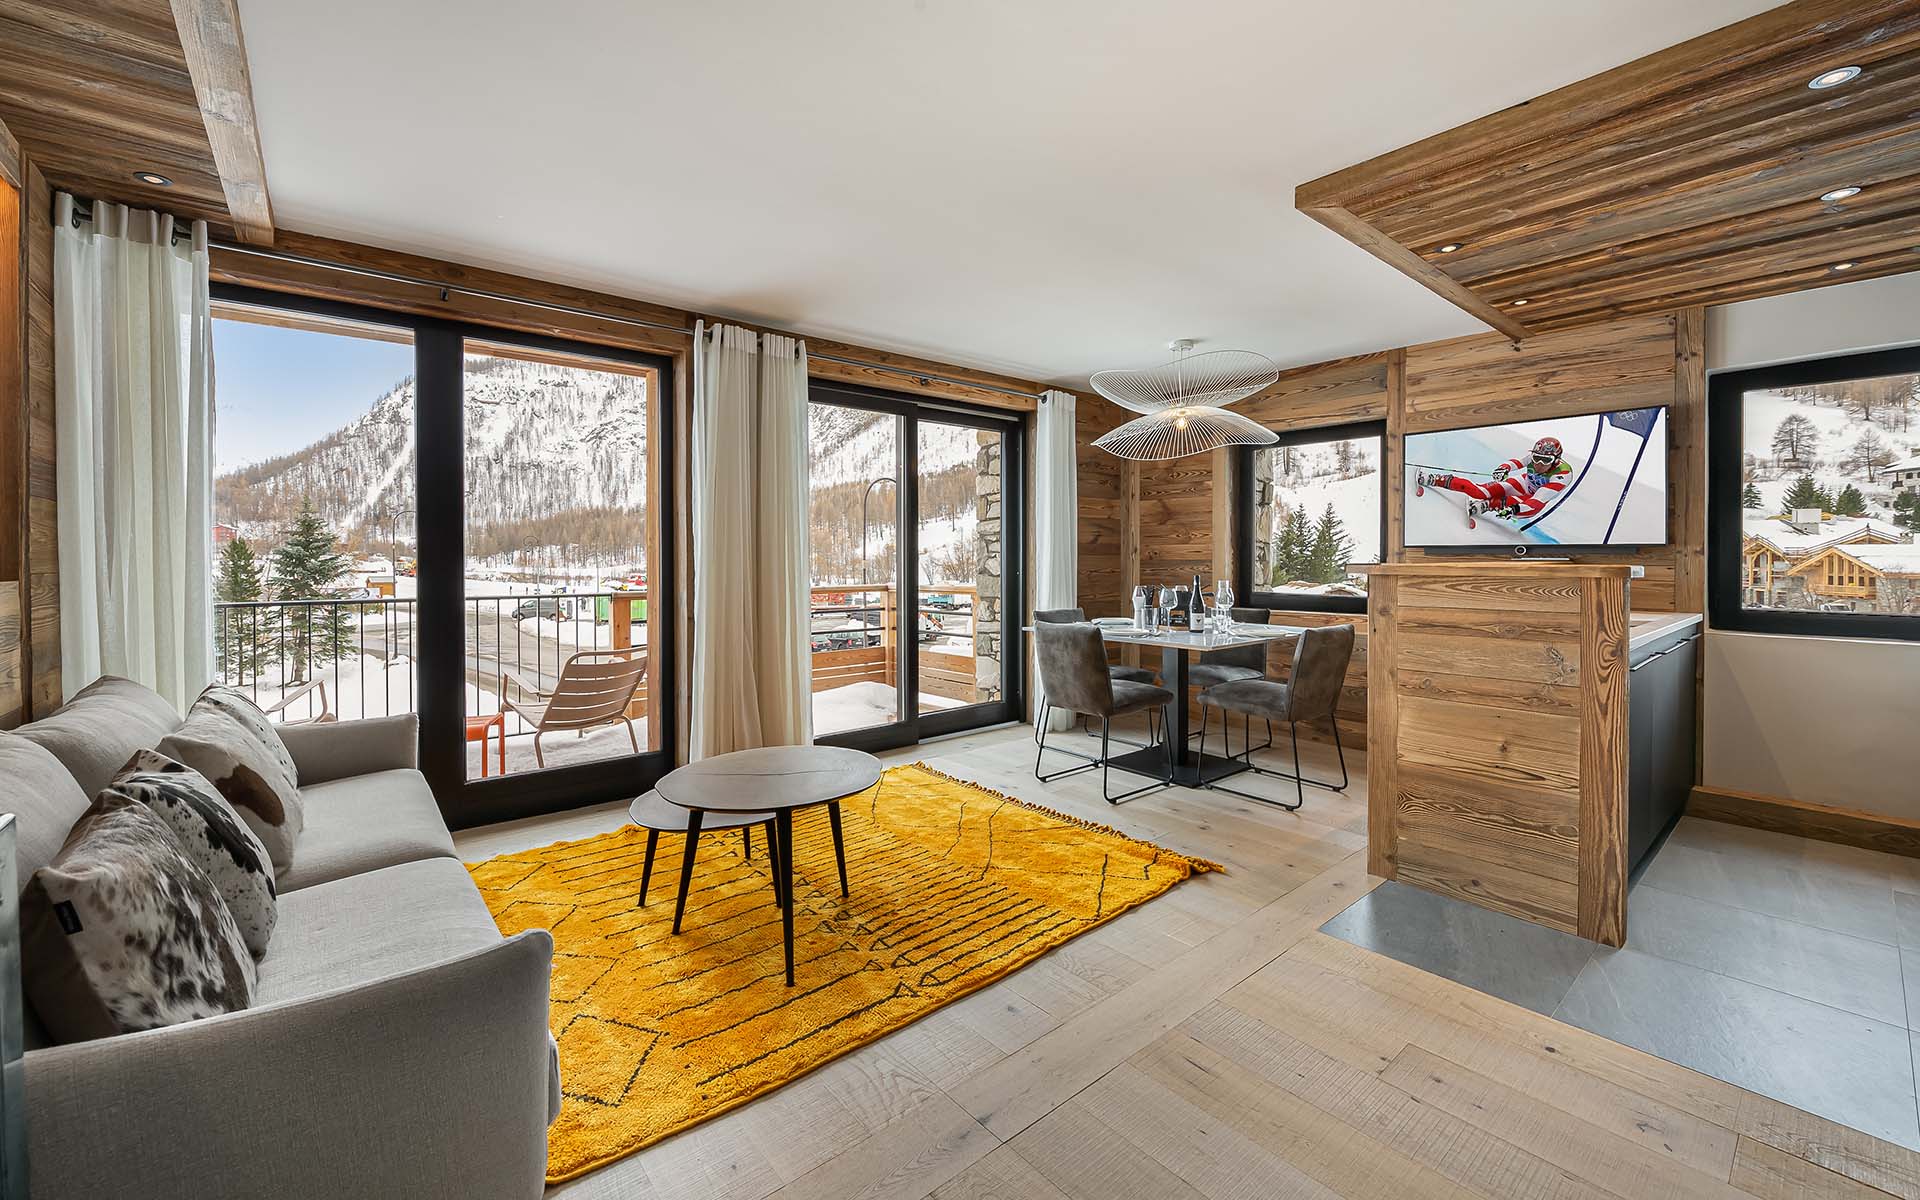 Luxury Self-Catered Ski Chalets - Firefly Collection